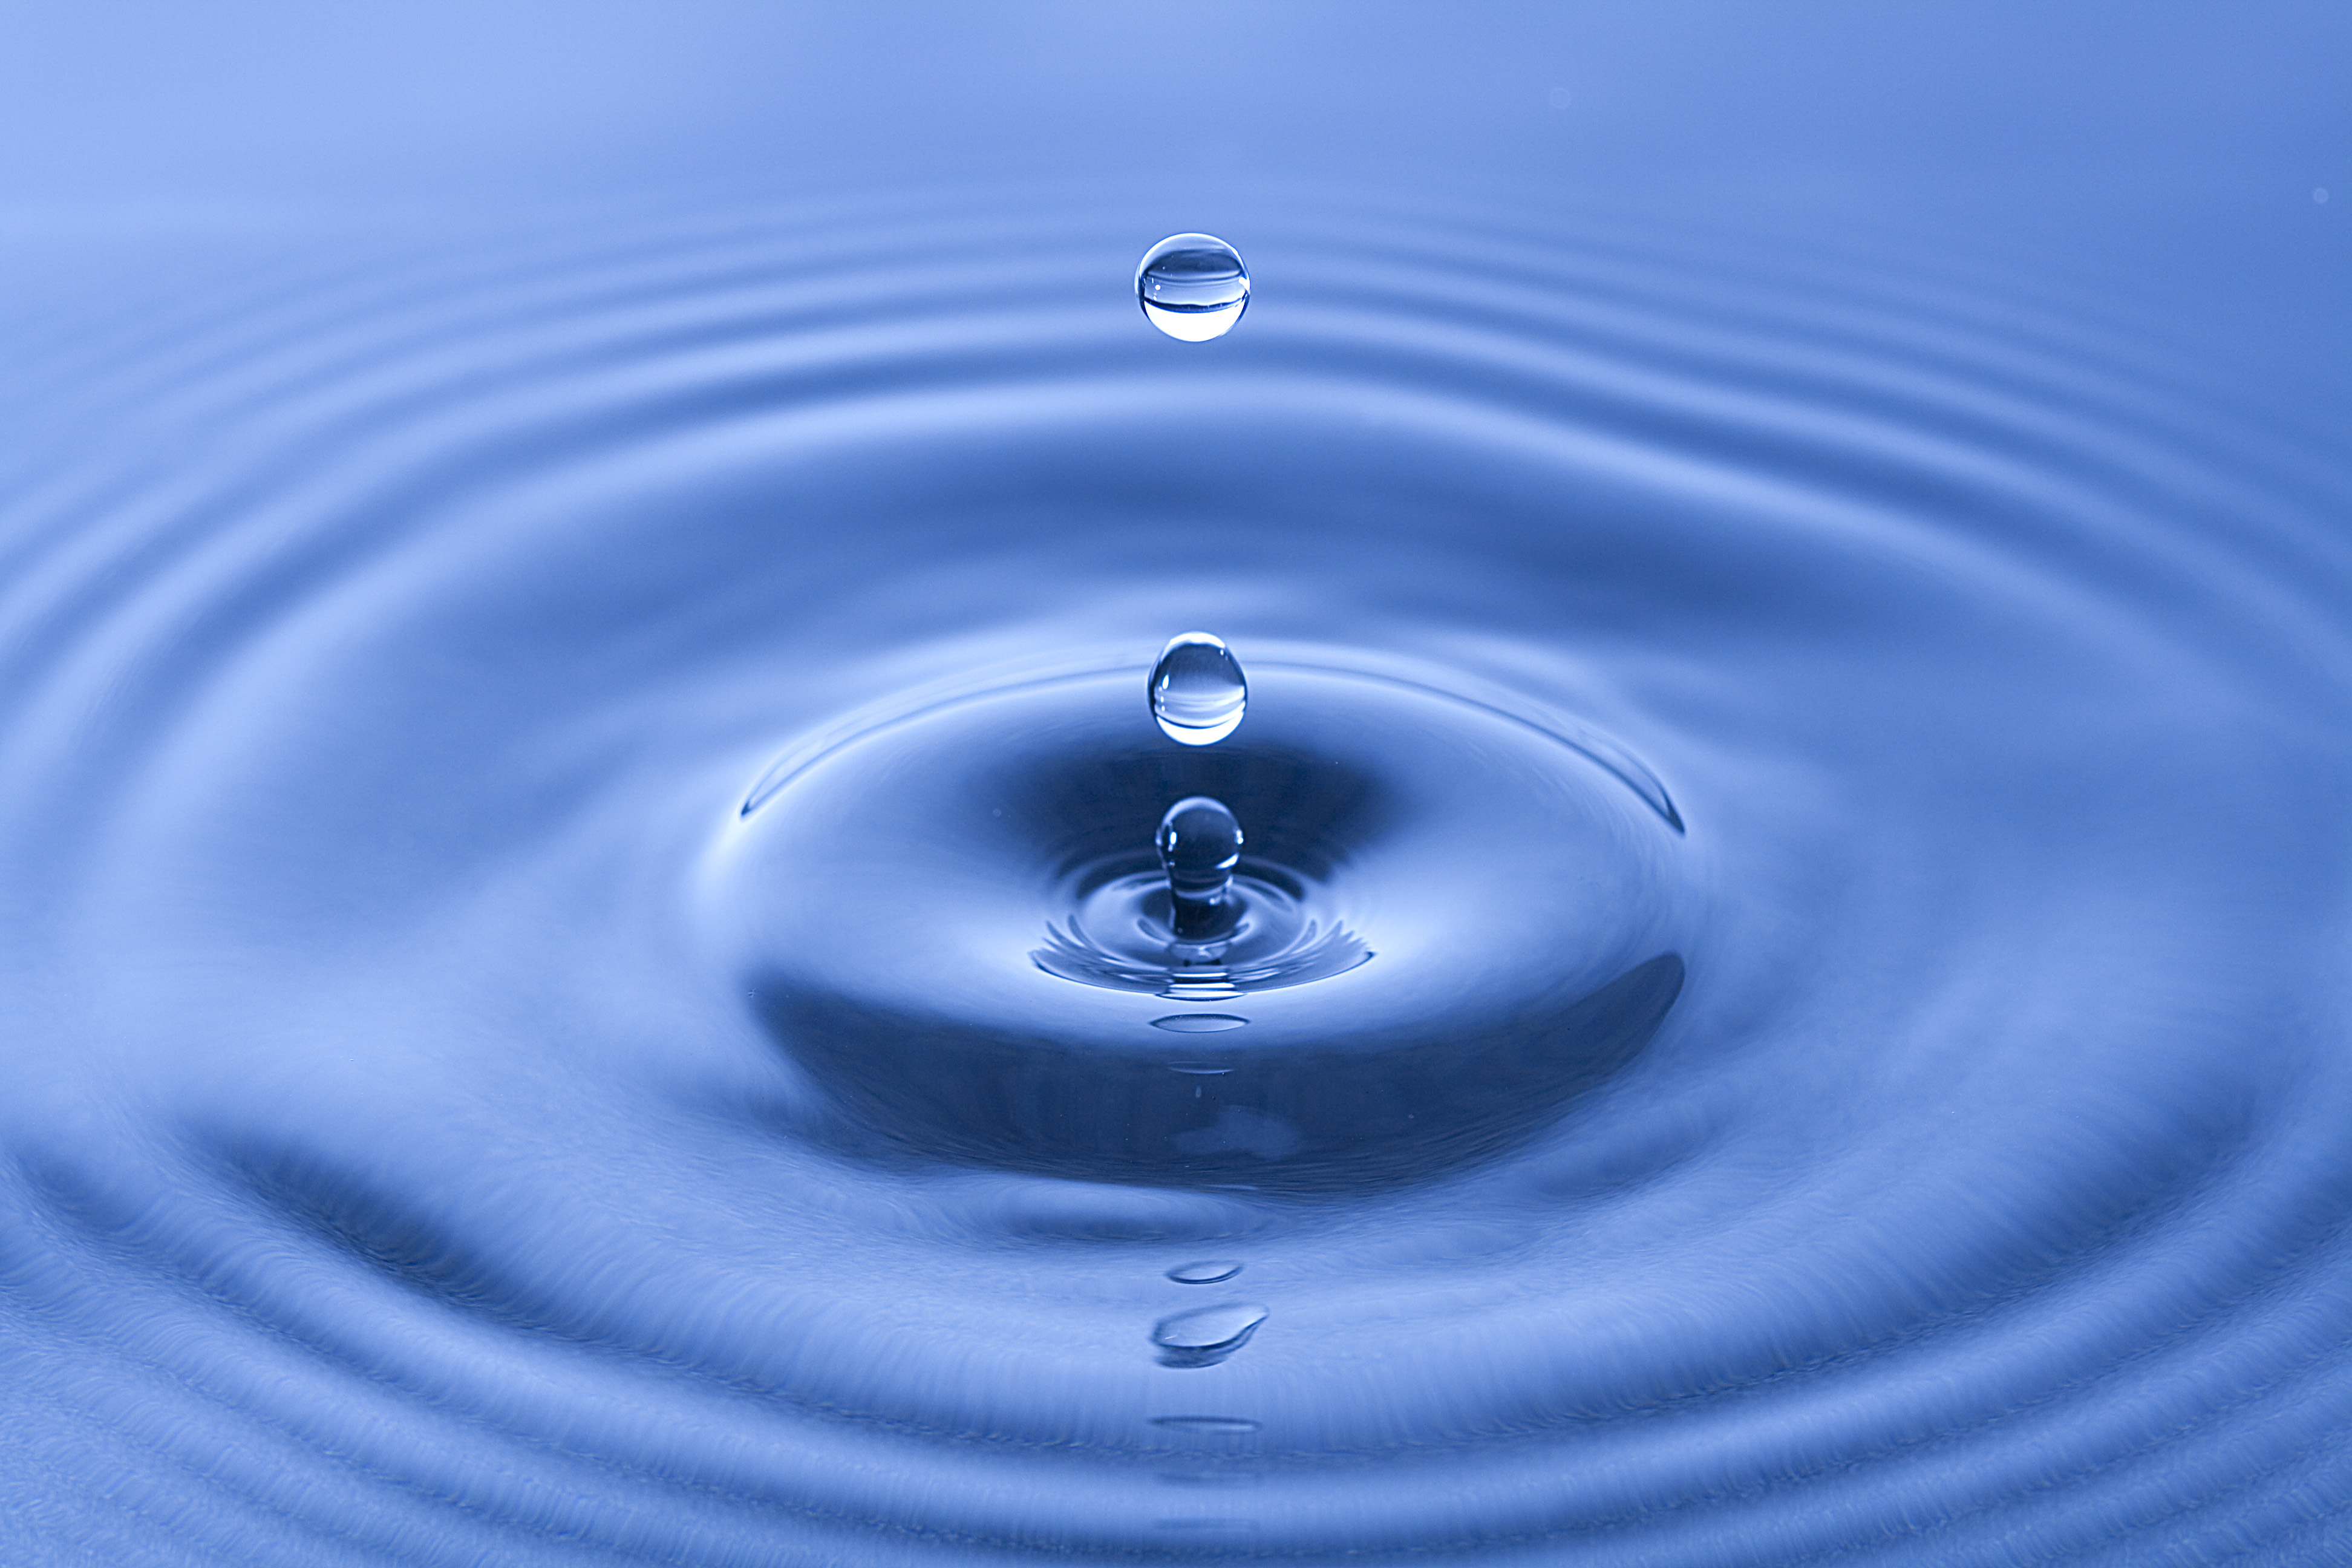 File:Water drop impact on a water-surface - (5).jpg - Wikimedia Commons